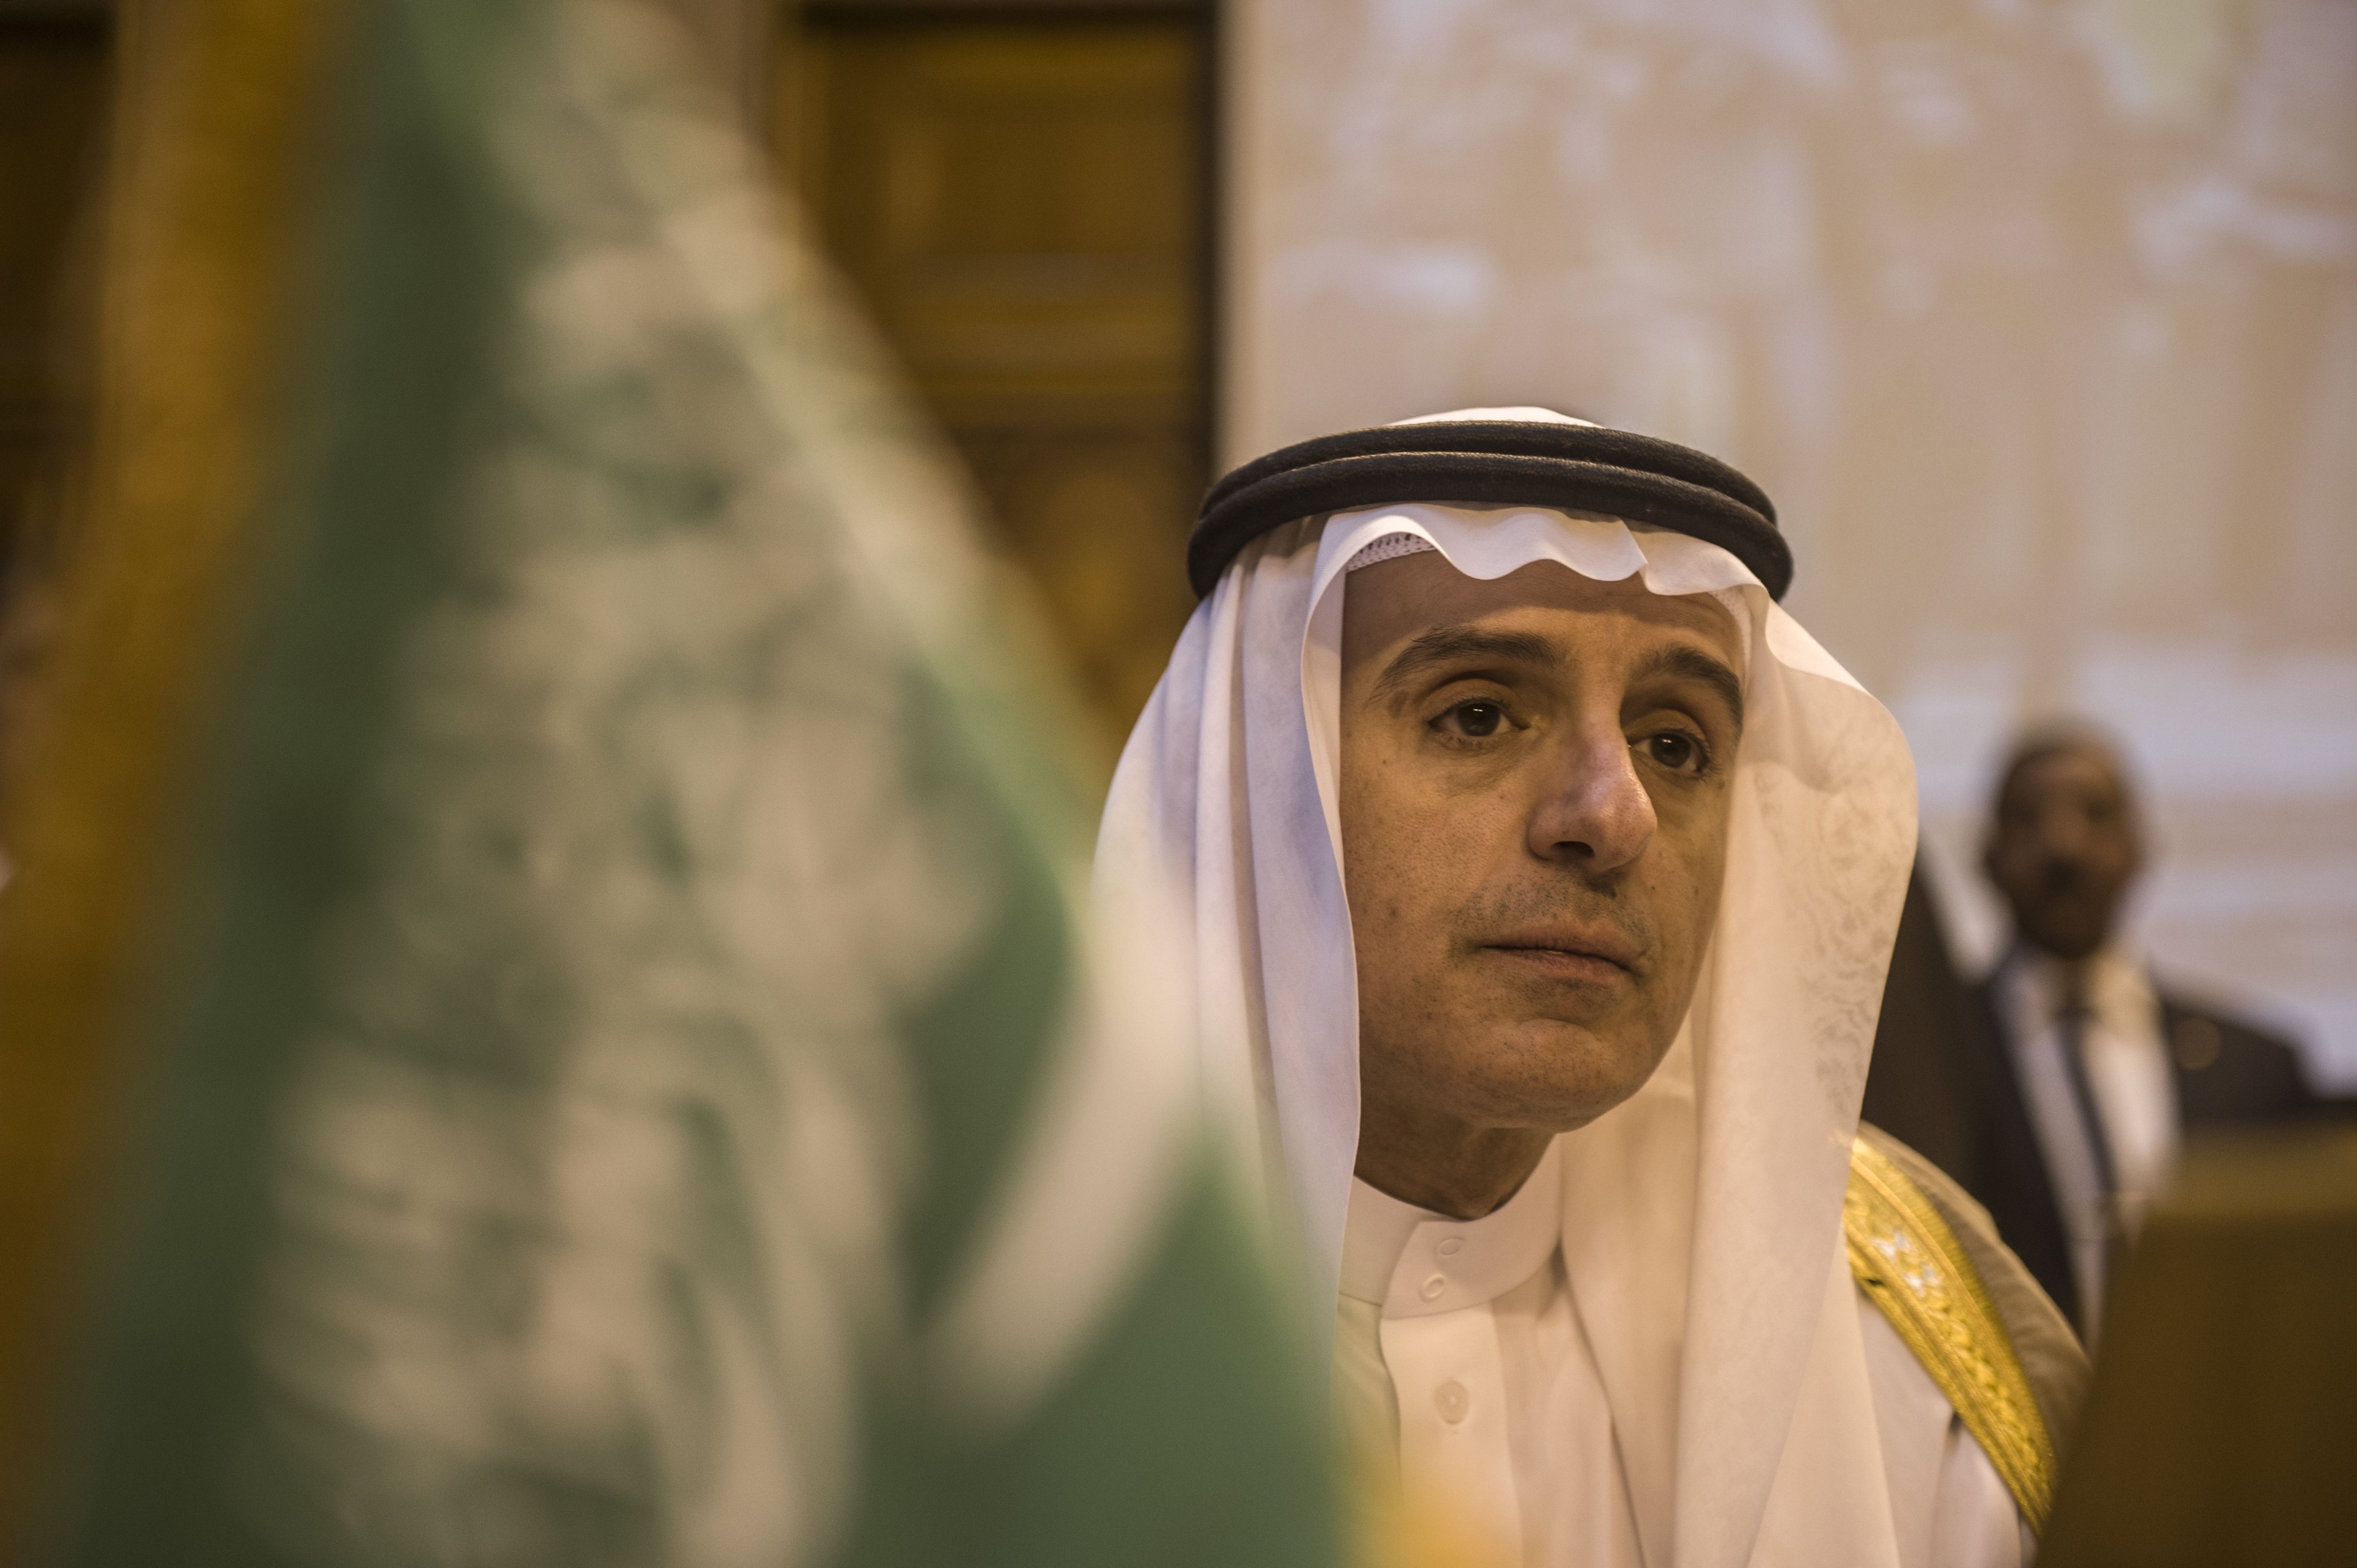 Saudi Minister of Foreign Affairs Adel al-Jubeir at an emergency meeting of Arab foreign ministers in Cairo on Jan. 10, 2016. (Khaled Desouki—AFP/Getty Images)